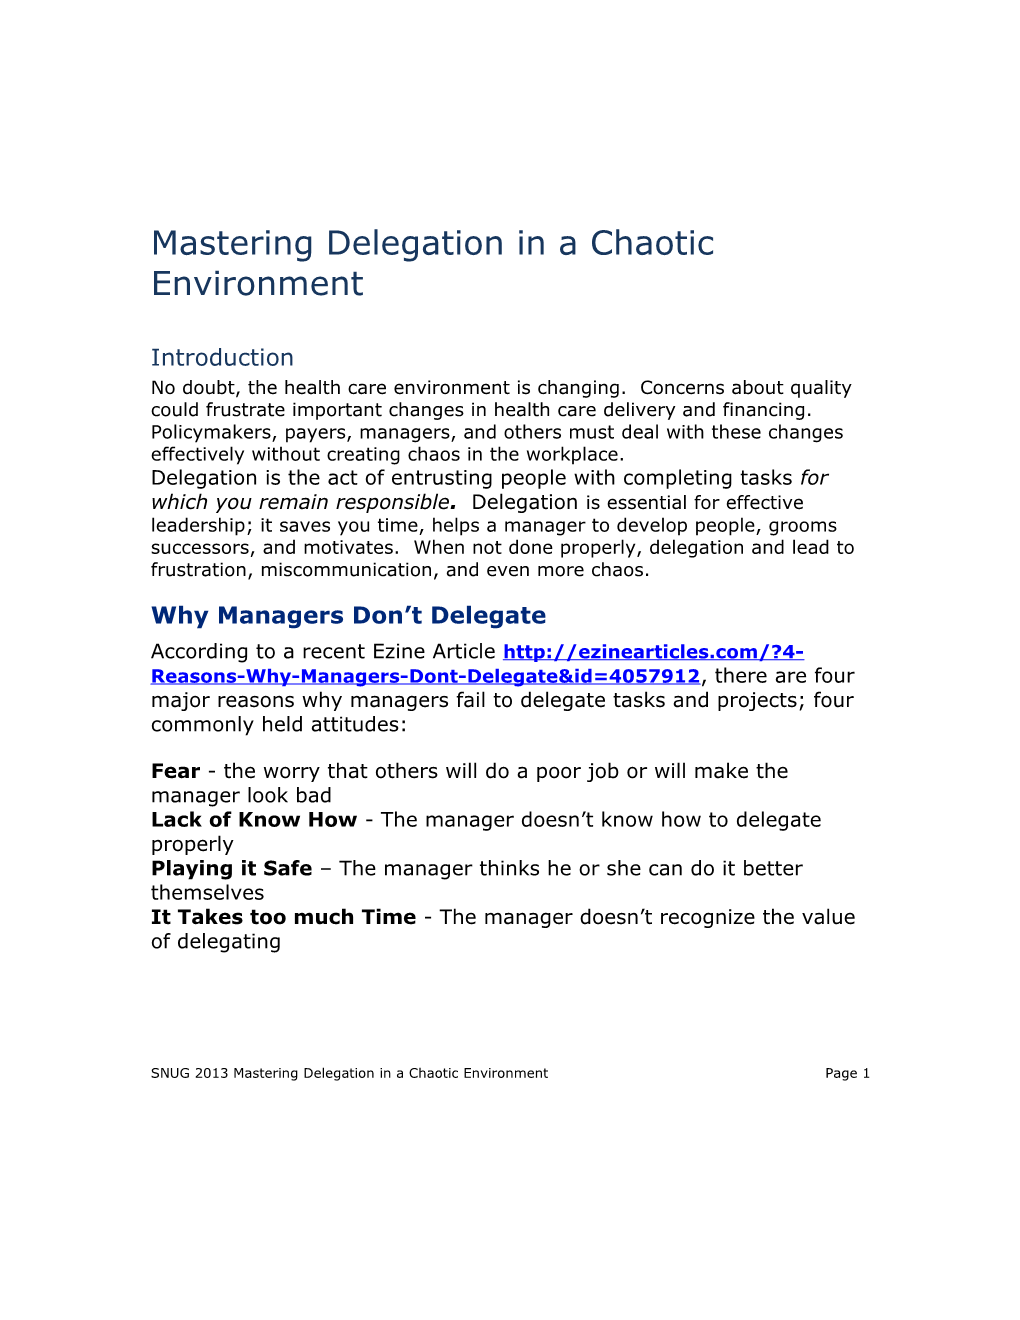 Mastering Delegation in a Chaotic Environment